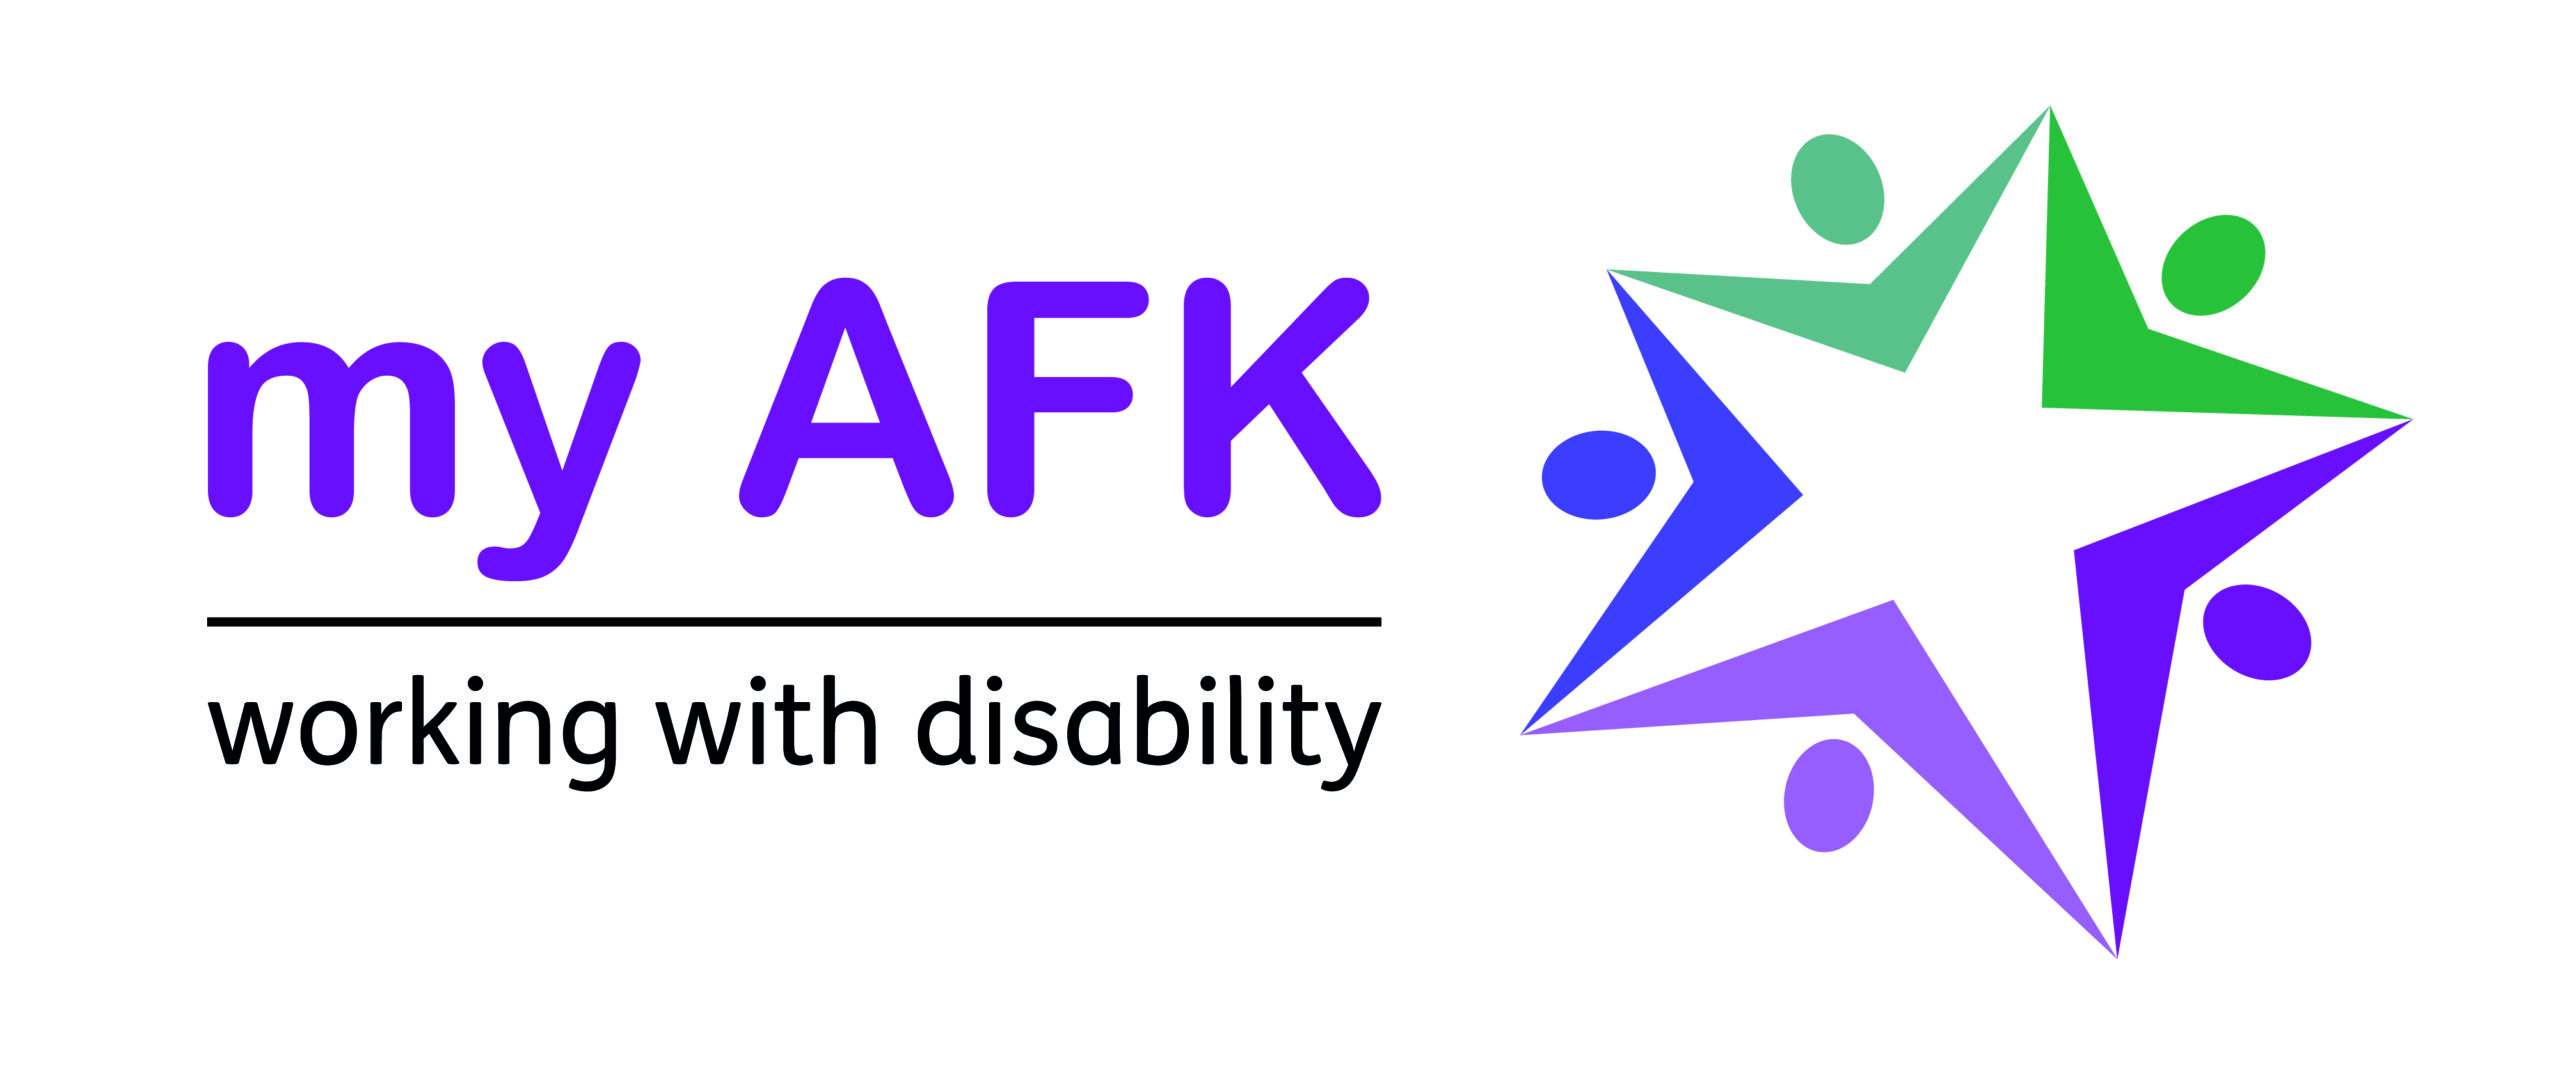 My AFK logo - working with disability